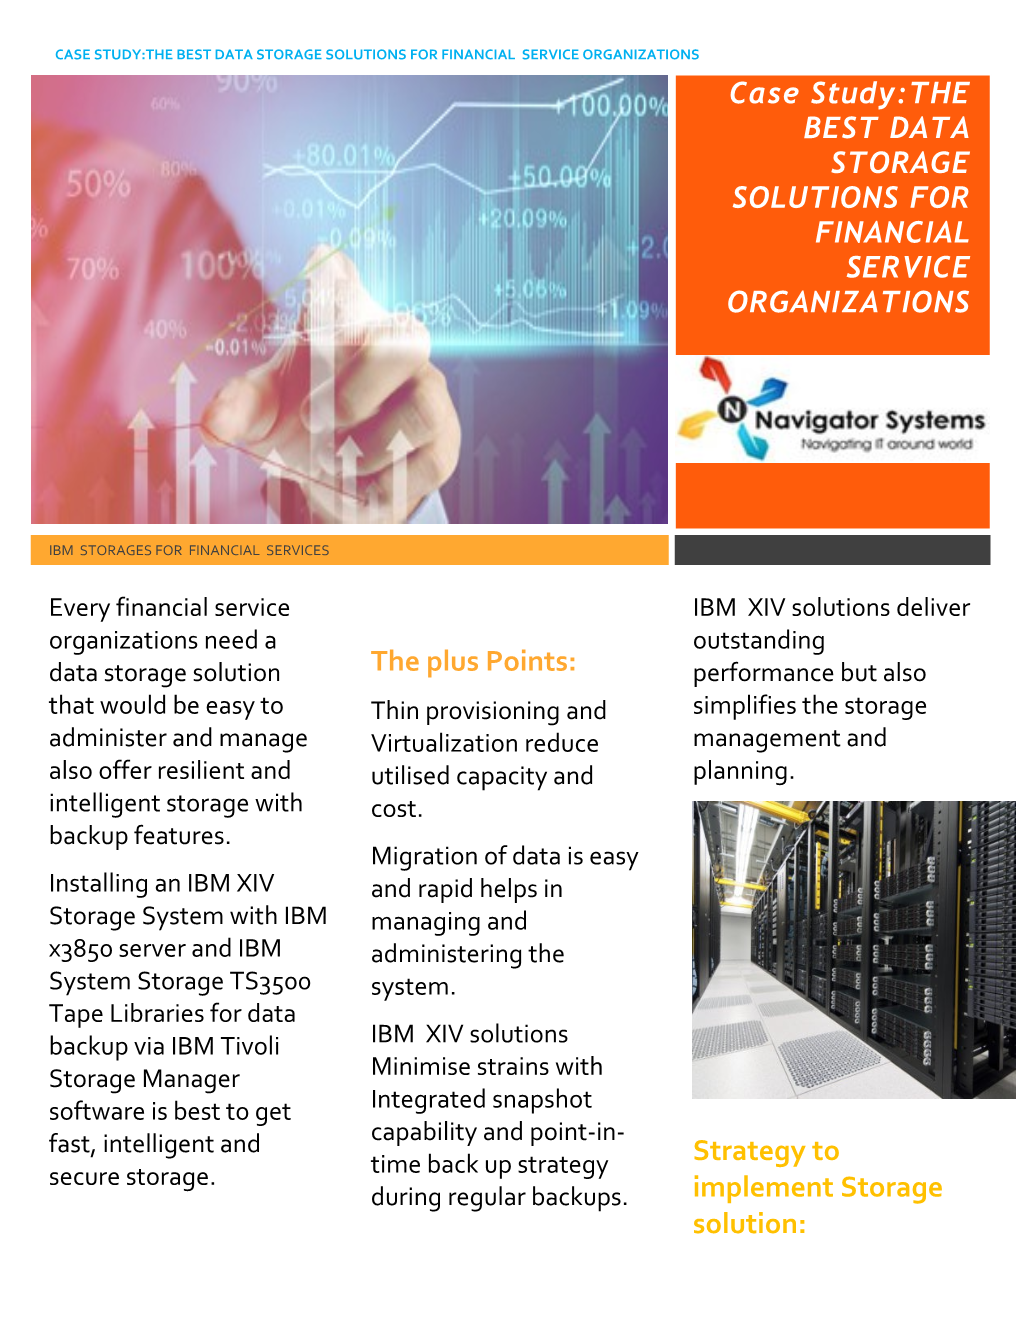 Case Study:THE BEST DATA STORAGE SOLUTIONS for FINANCIAL SERVICE ORGANIZATIONS